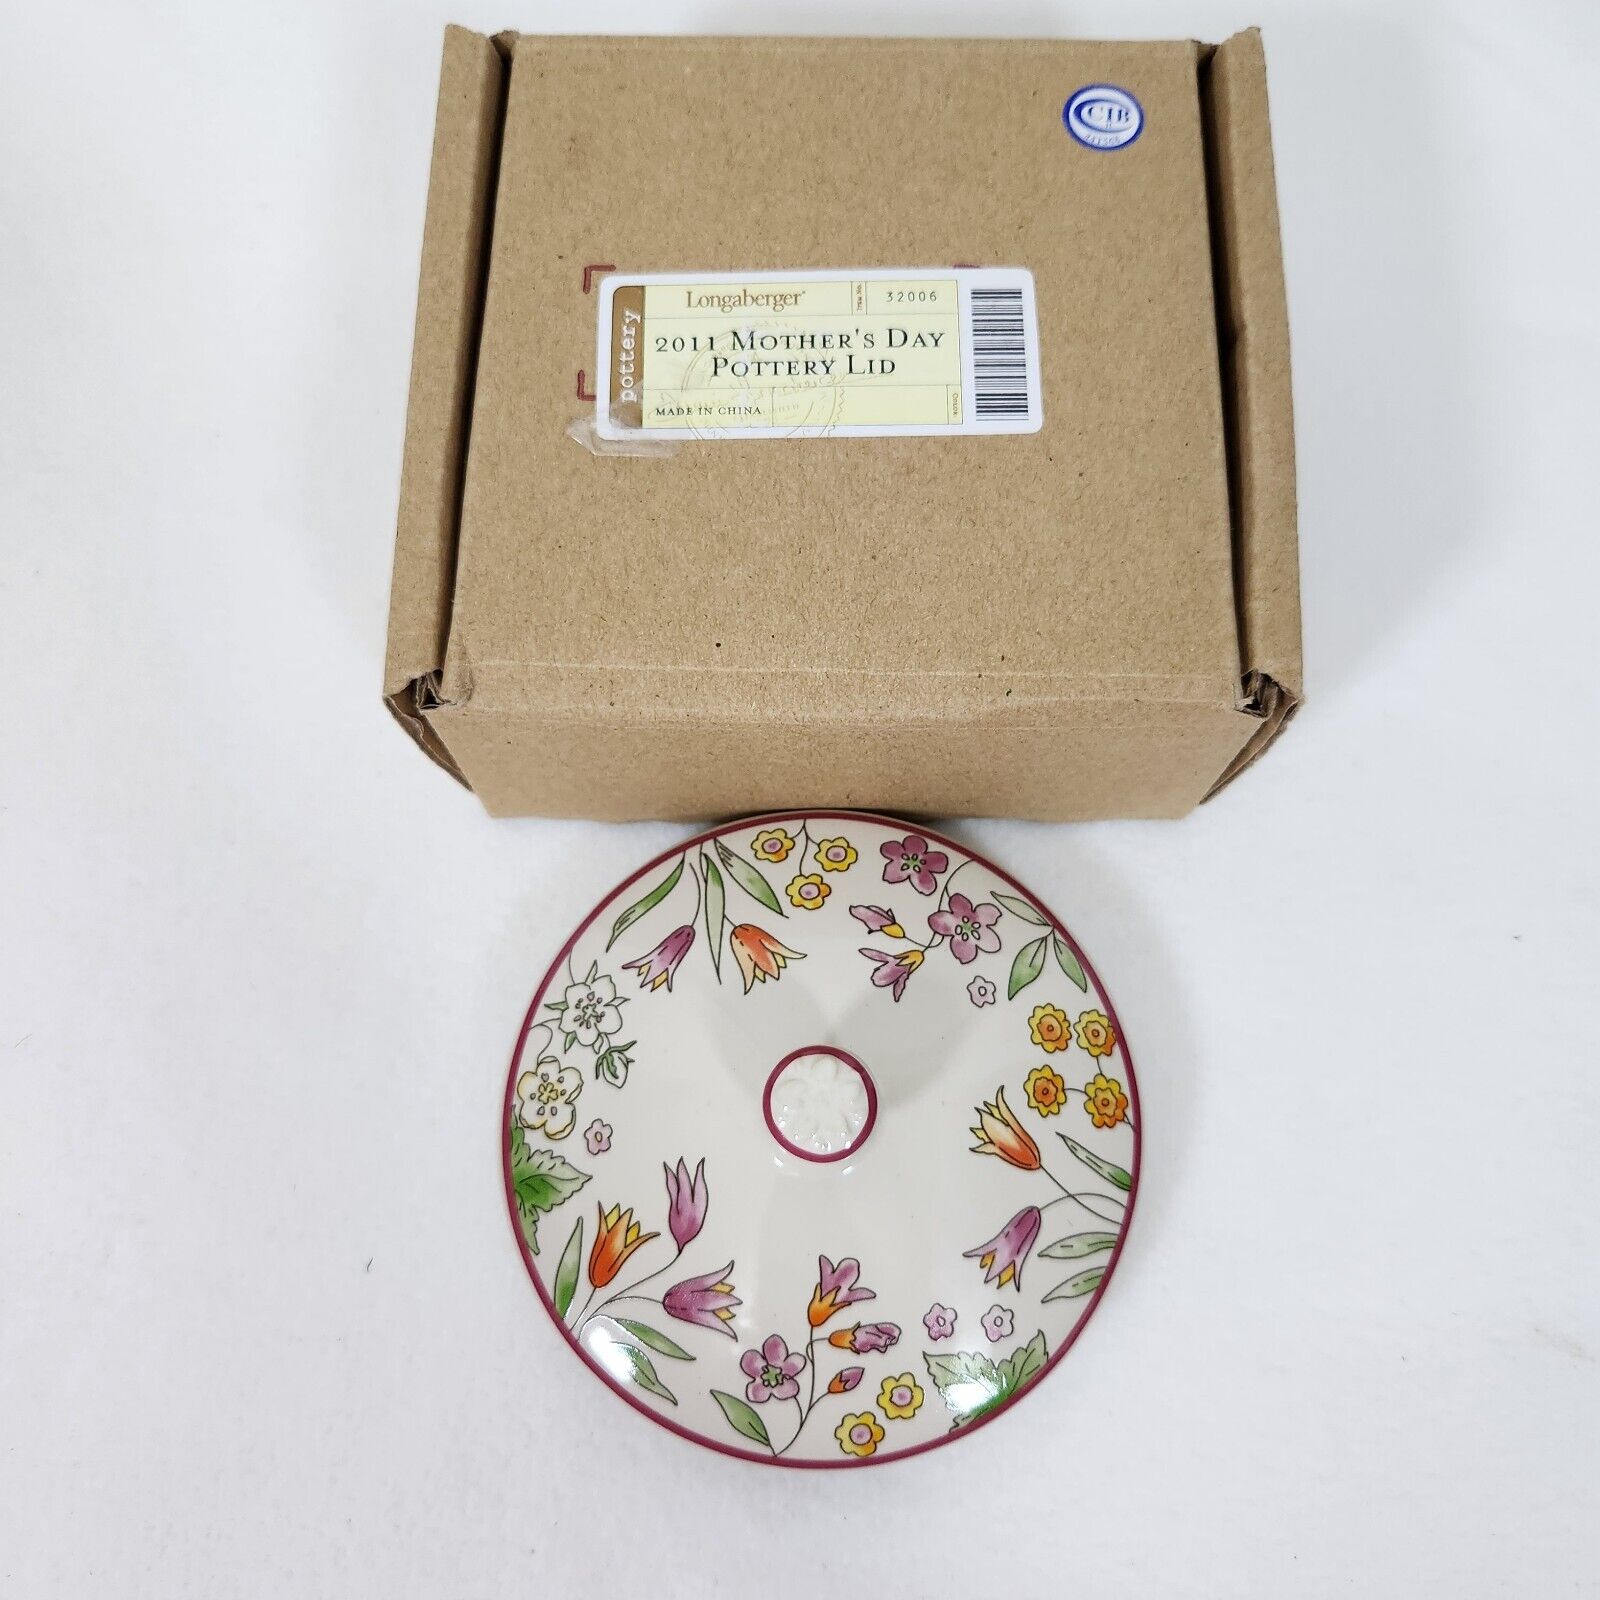 Longaberger 2011 Pottery Ceramic Mother’s Day Lid Only #32006 Floral w Knob NOS